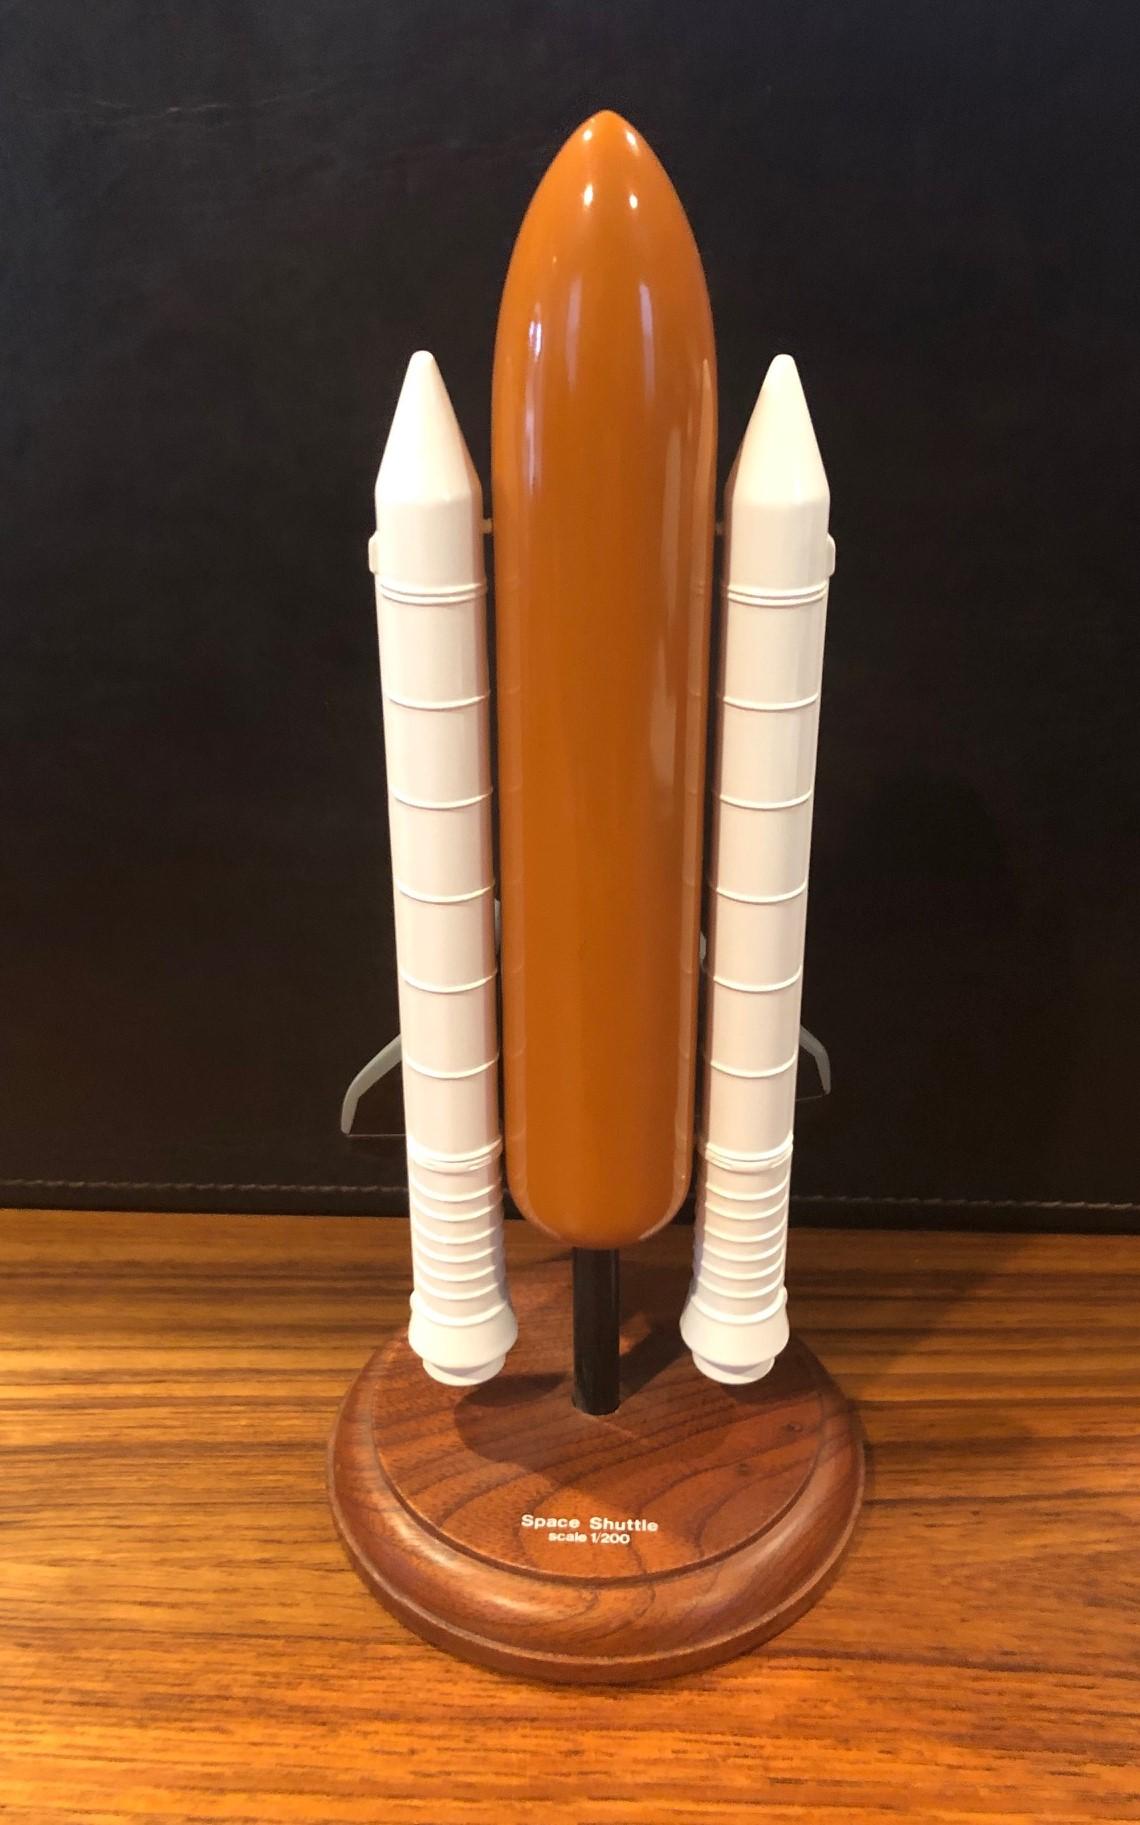 space shuttle models for sale